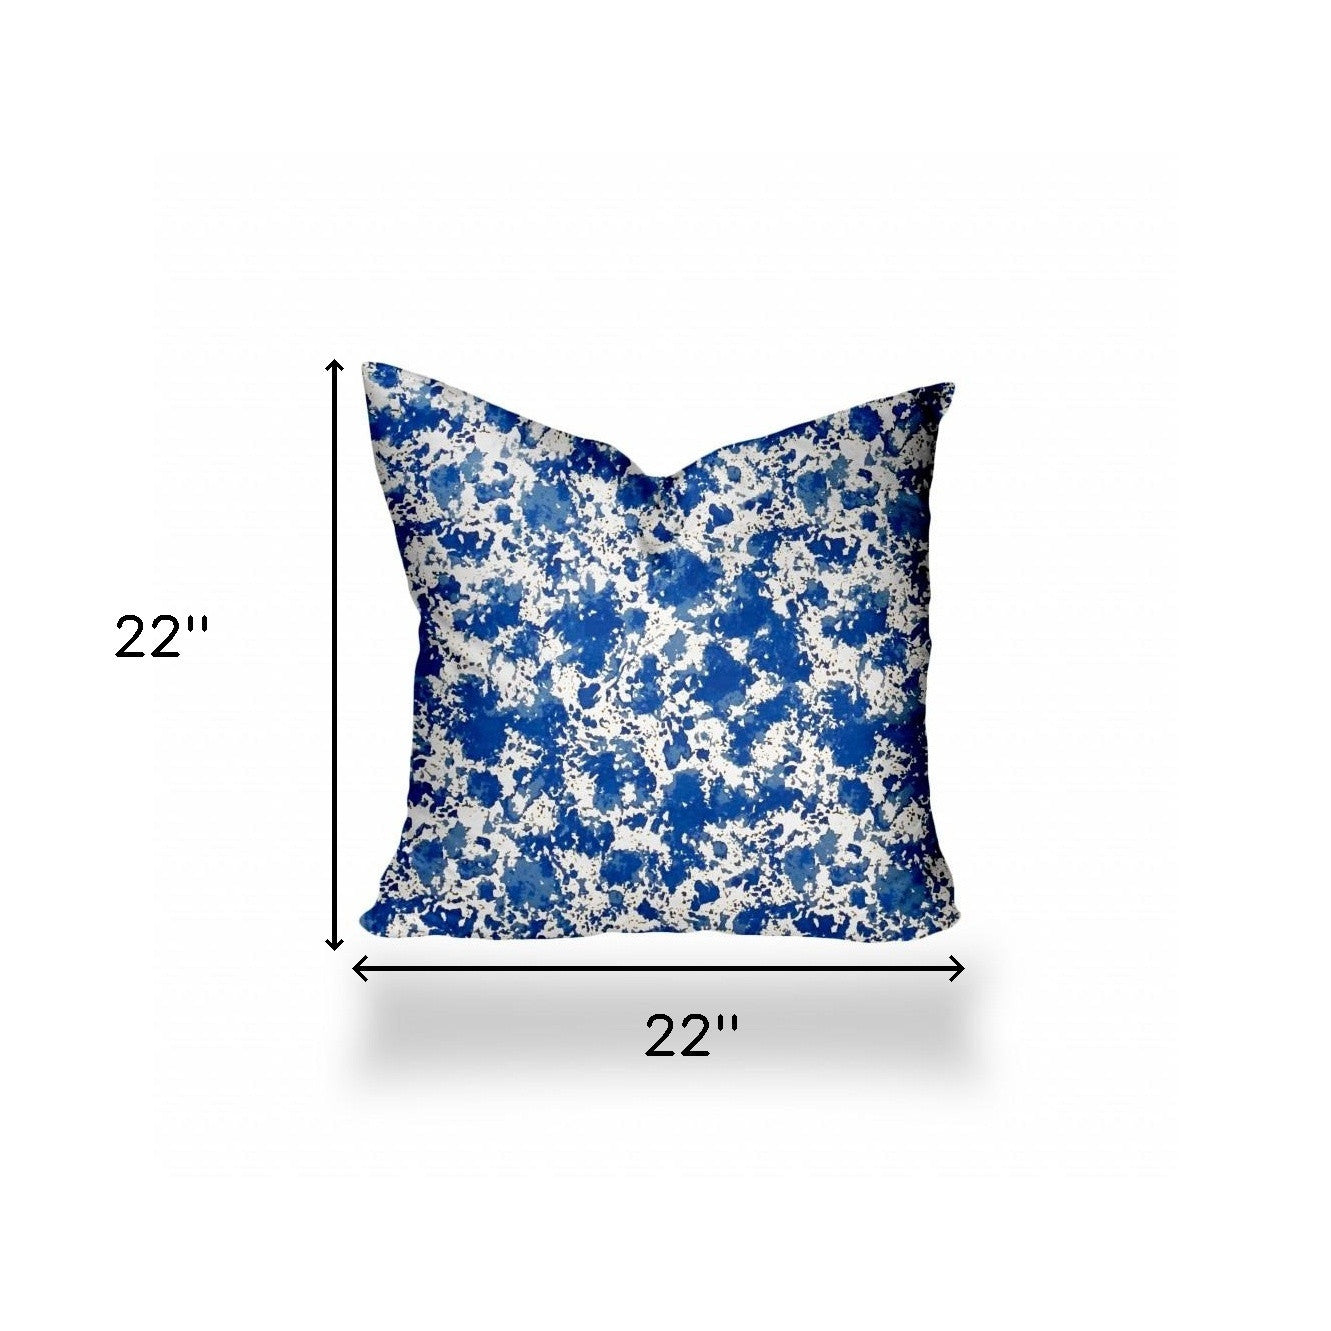 22" X 22" Blue And White Zippered Coastal Throw Indoor Outdoor Pillow Cover